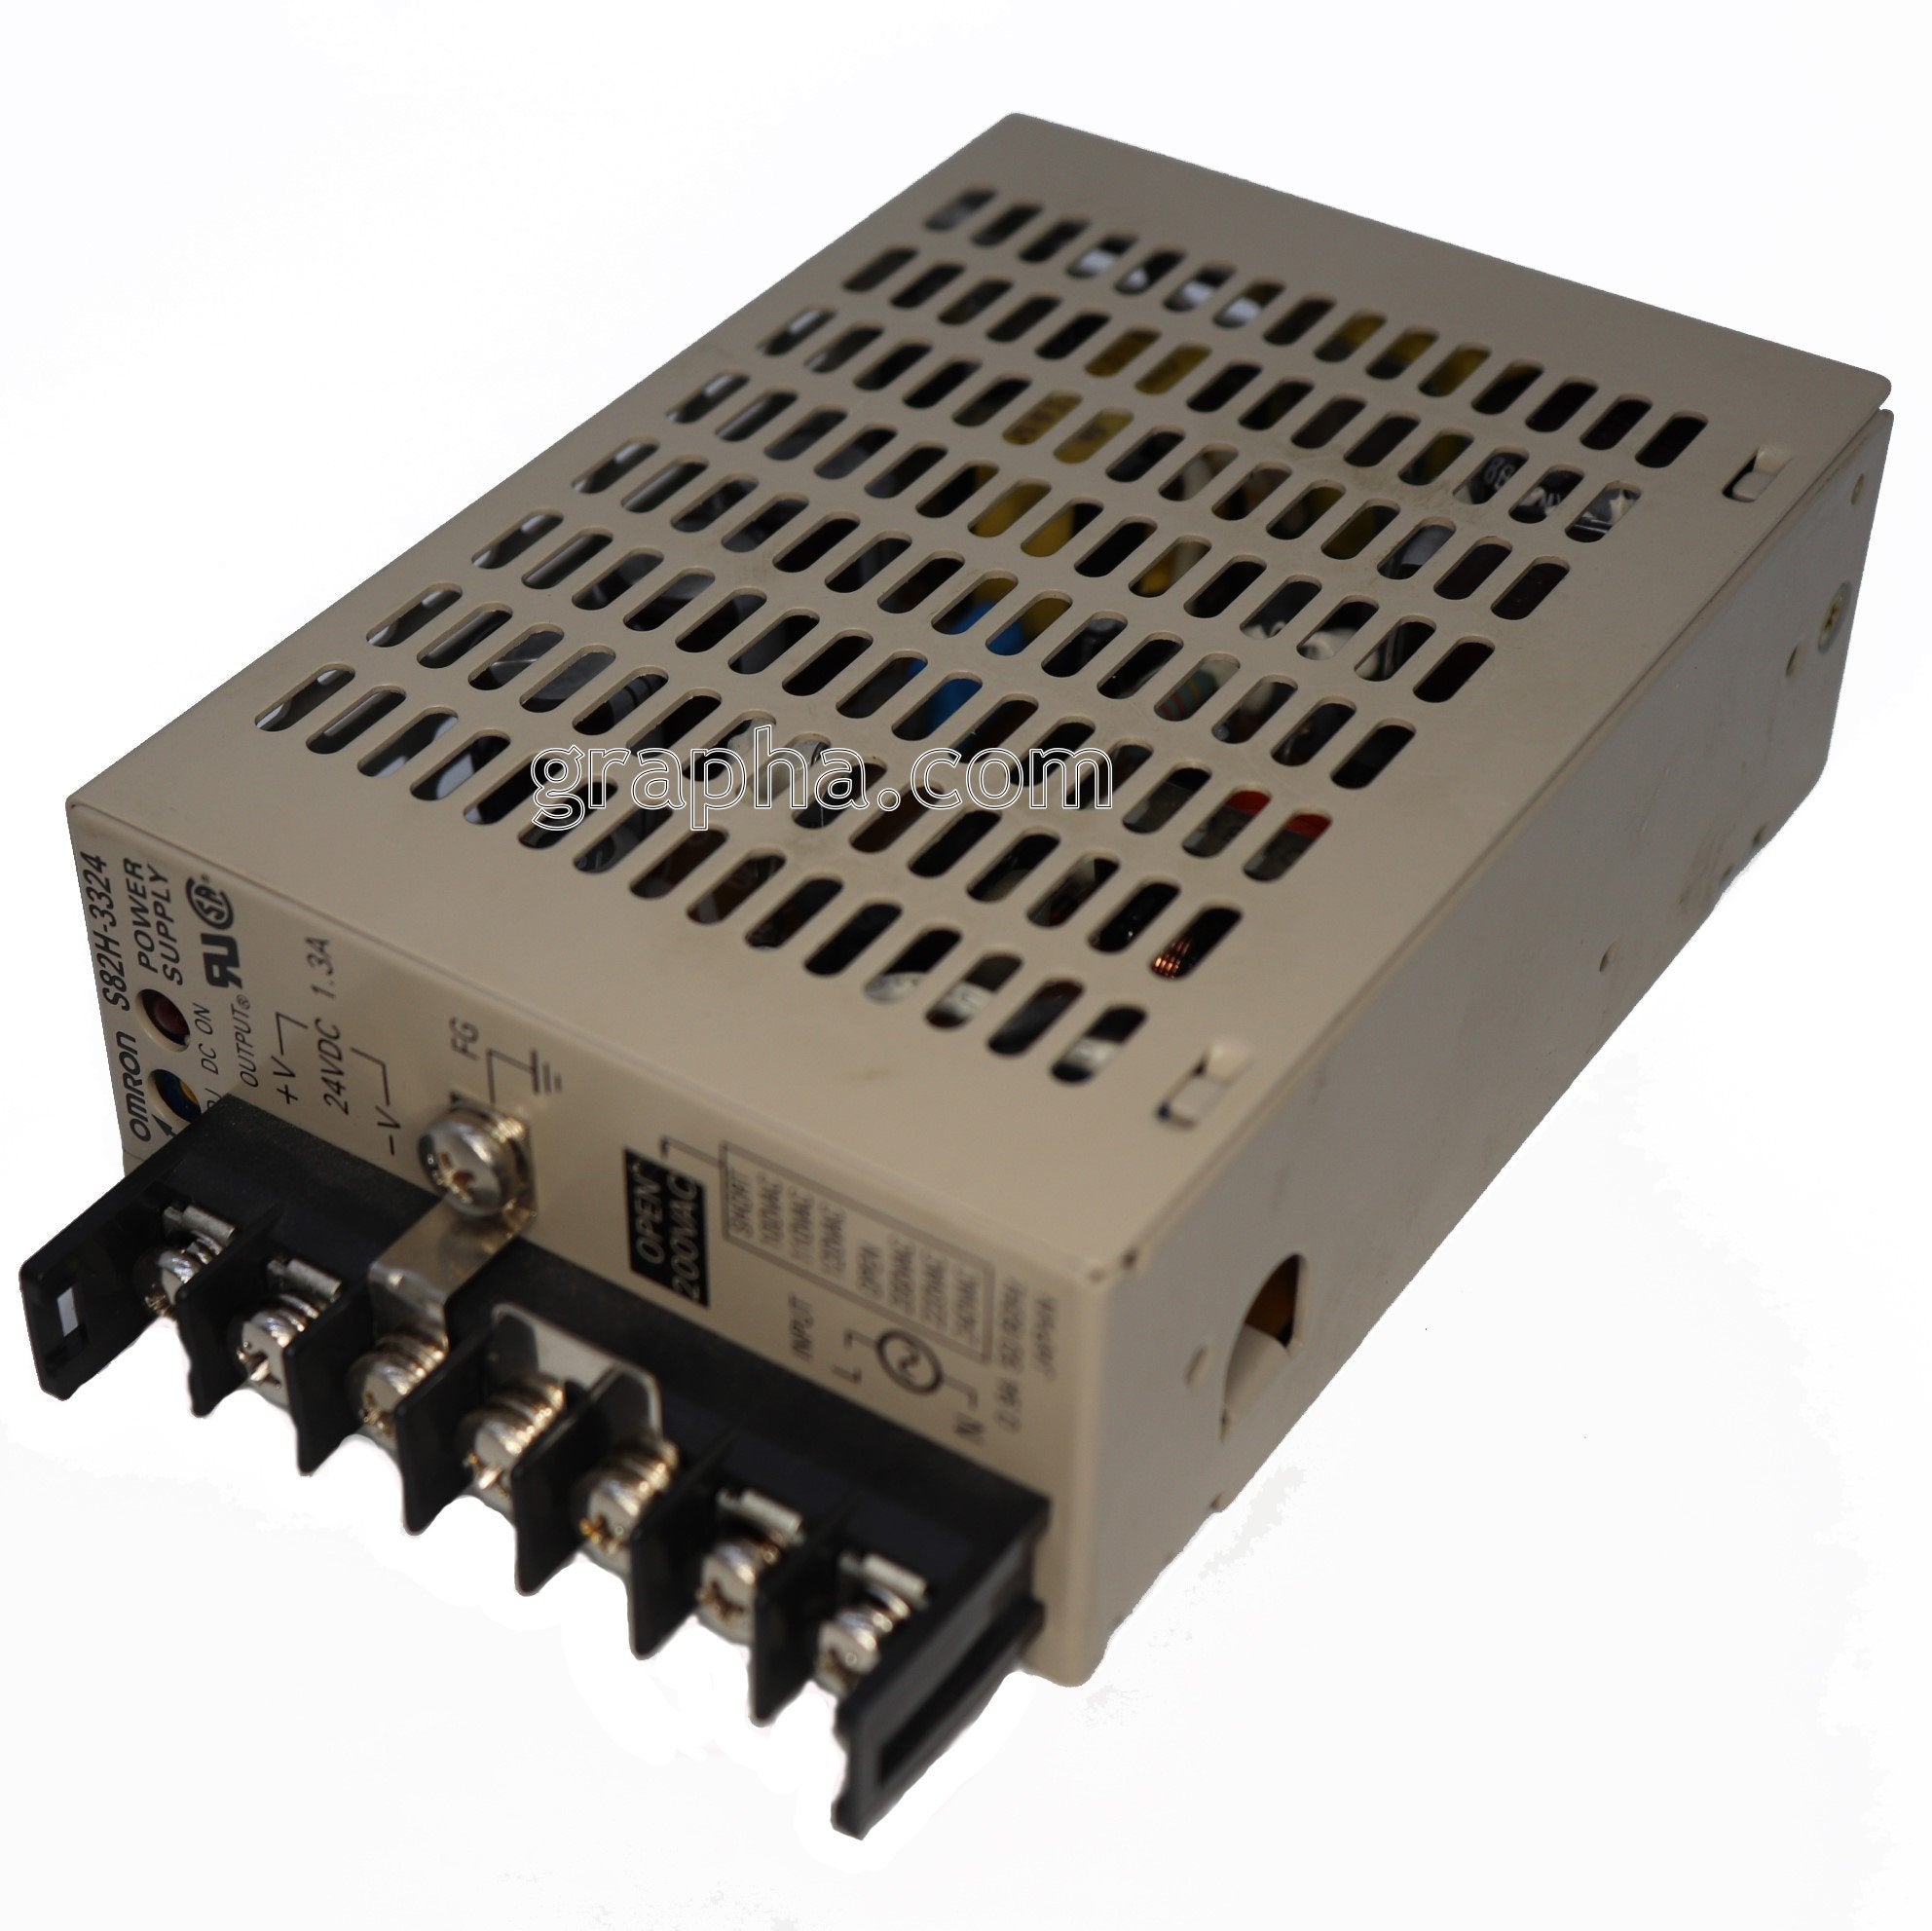 Omron power supply: S82H-3324